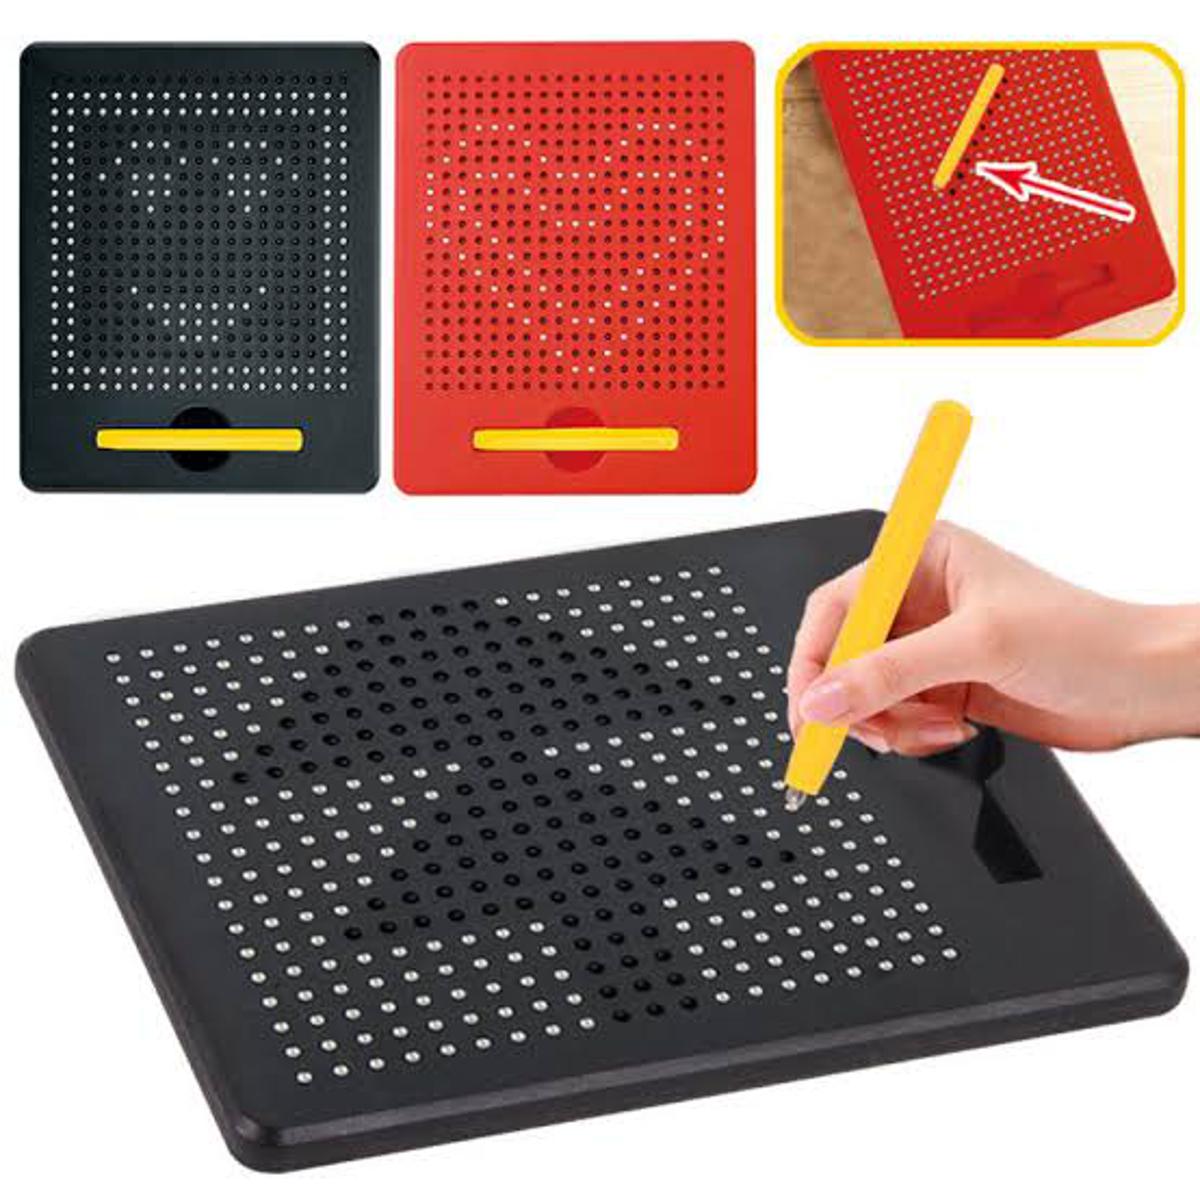 Kids Magnetic Ball Sketch Pad Tablet Drawing Pen Board With Magnetic Stylus  | eBay